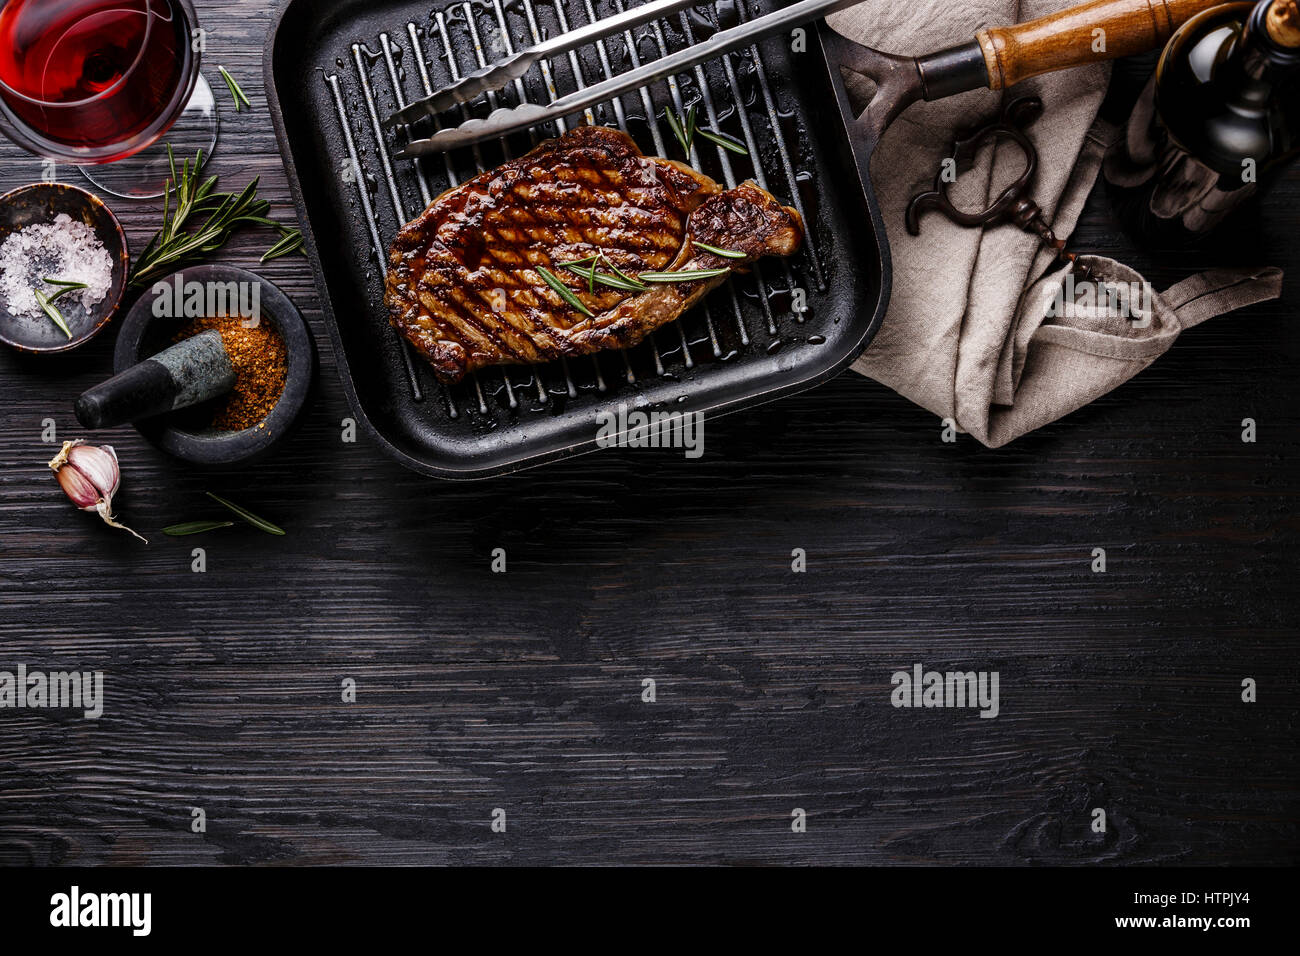 Grilled Steak Striploin on pan and red wine on black burned wooden background copy space Stock Photo